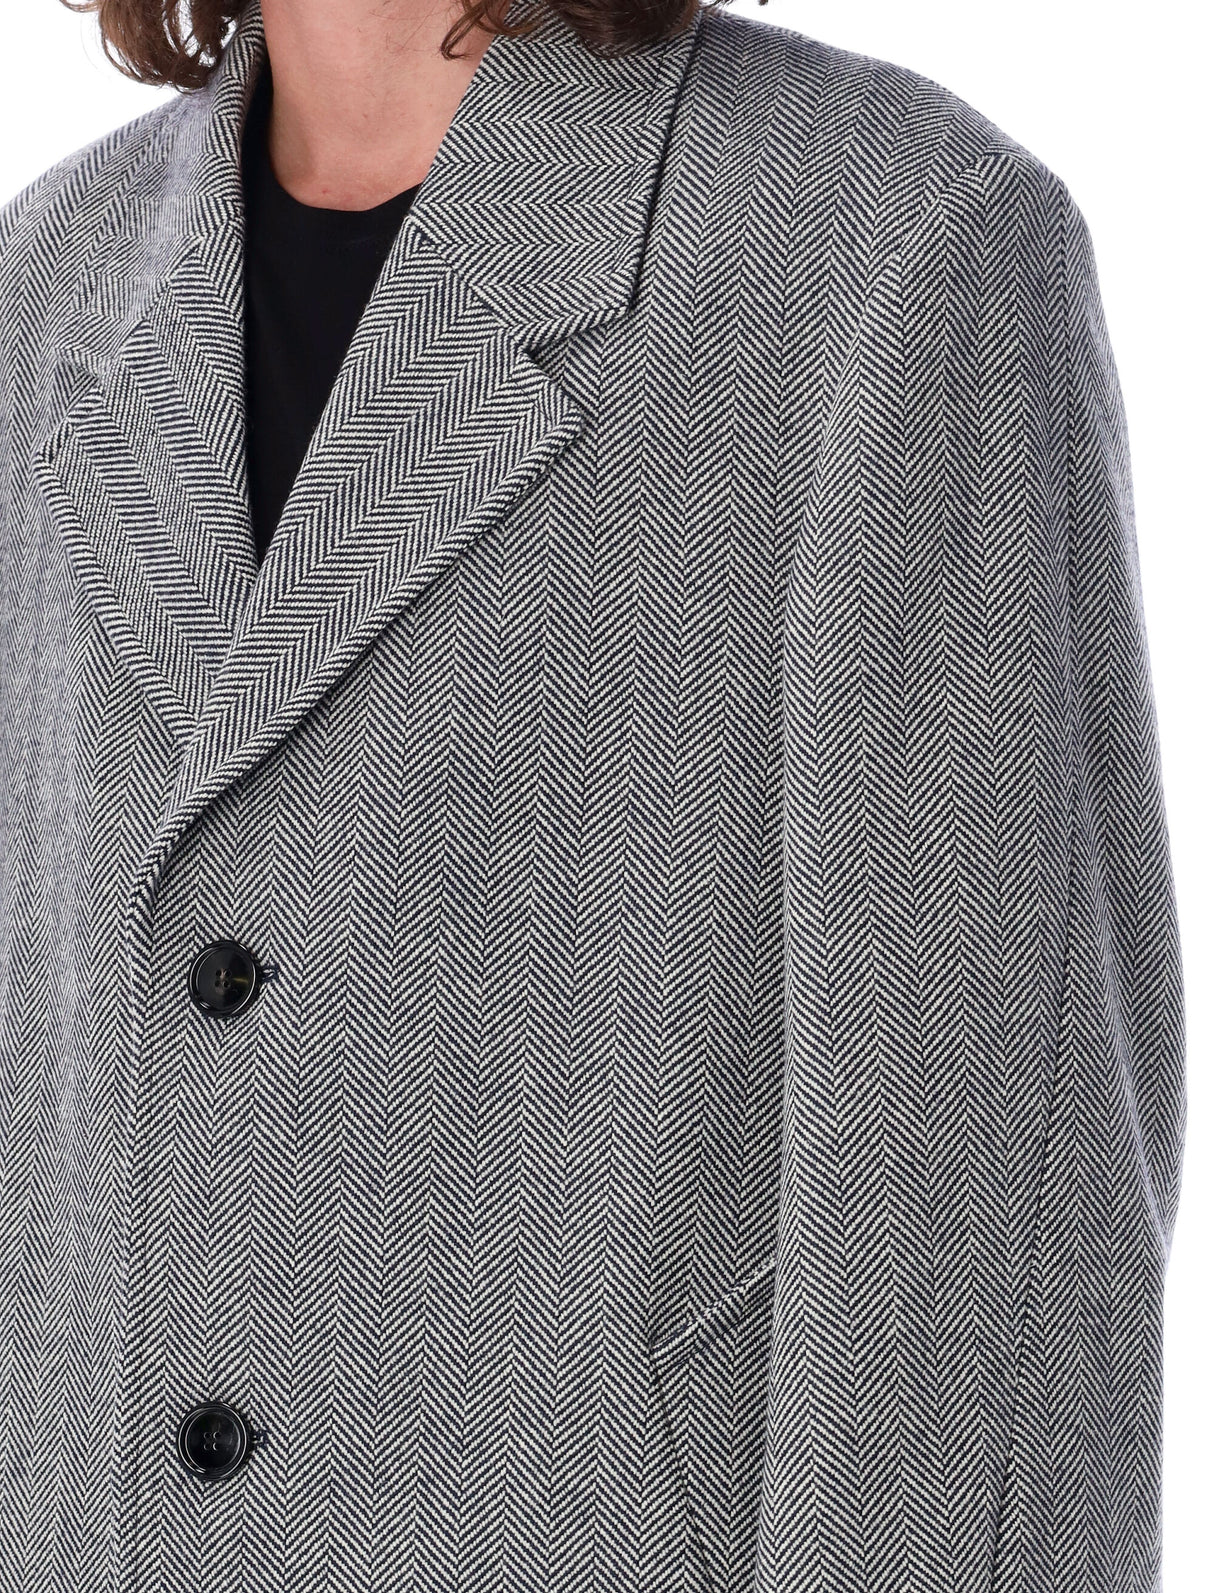 Herringbone Jacket with V-Neck and Single Breast by AMI PARIS for Men